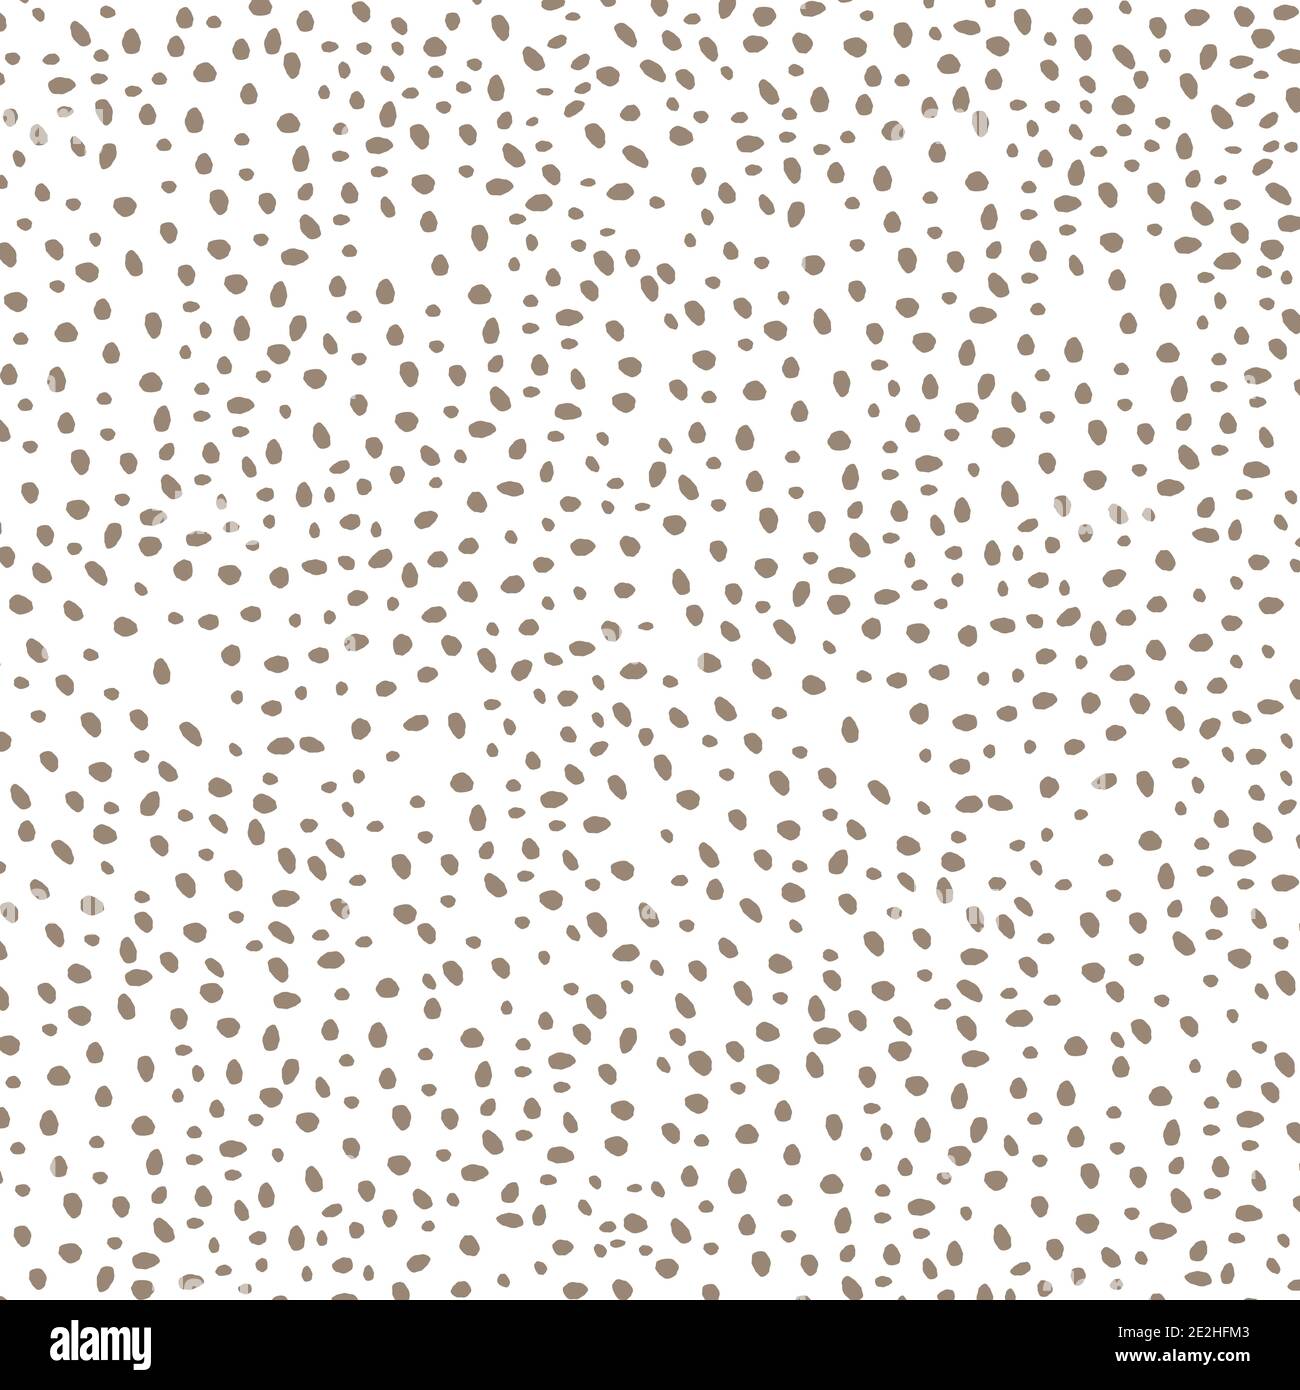 uneven dots or spots on white background vector illustration Stock Vector